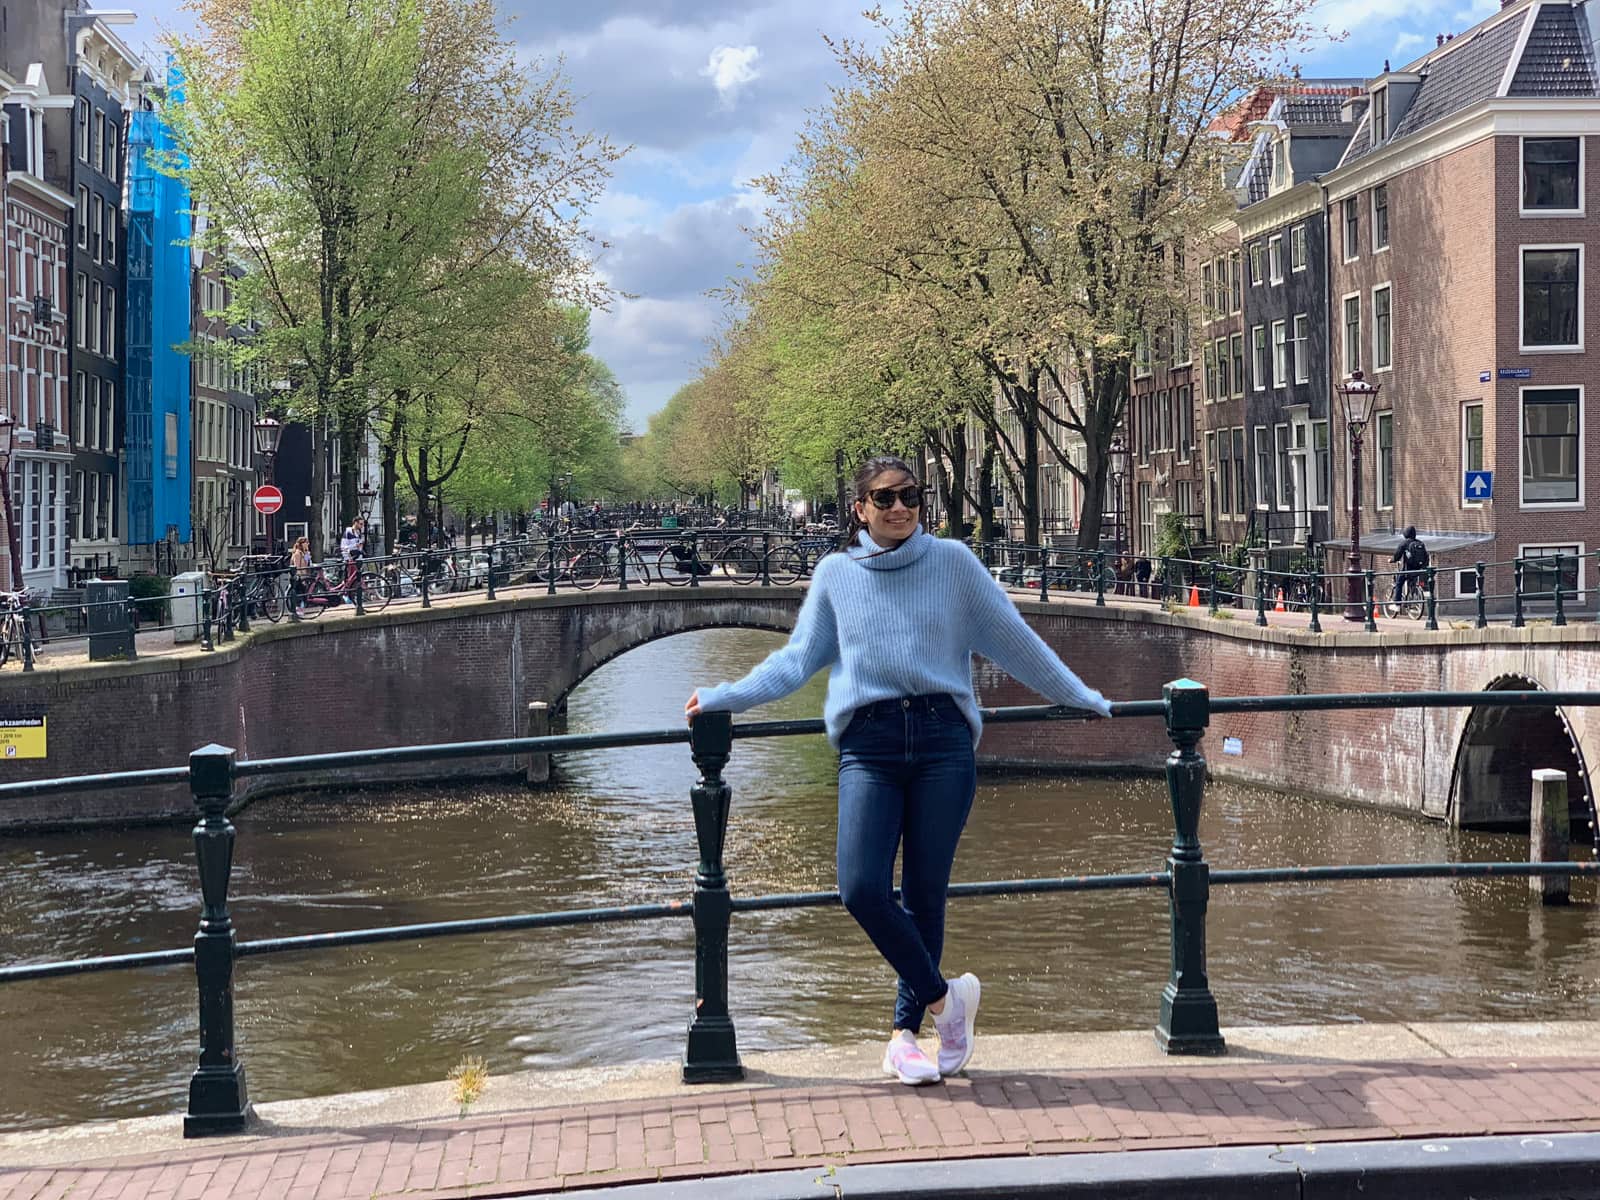 A woman in a light blue sweater leaning back against the railing of a bridge with a canal below it